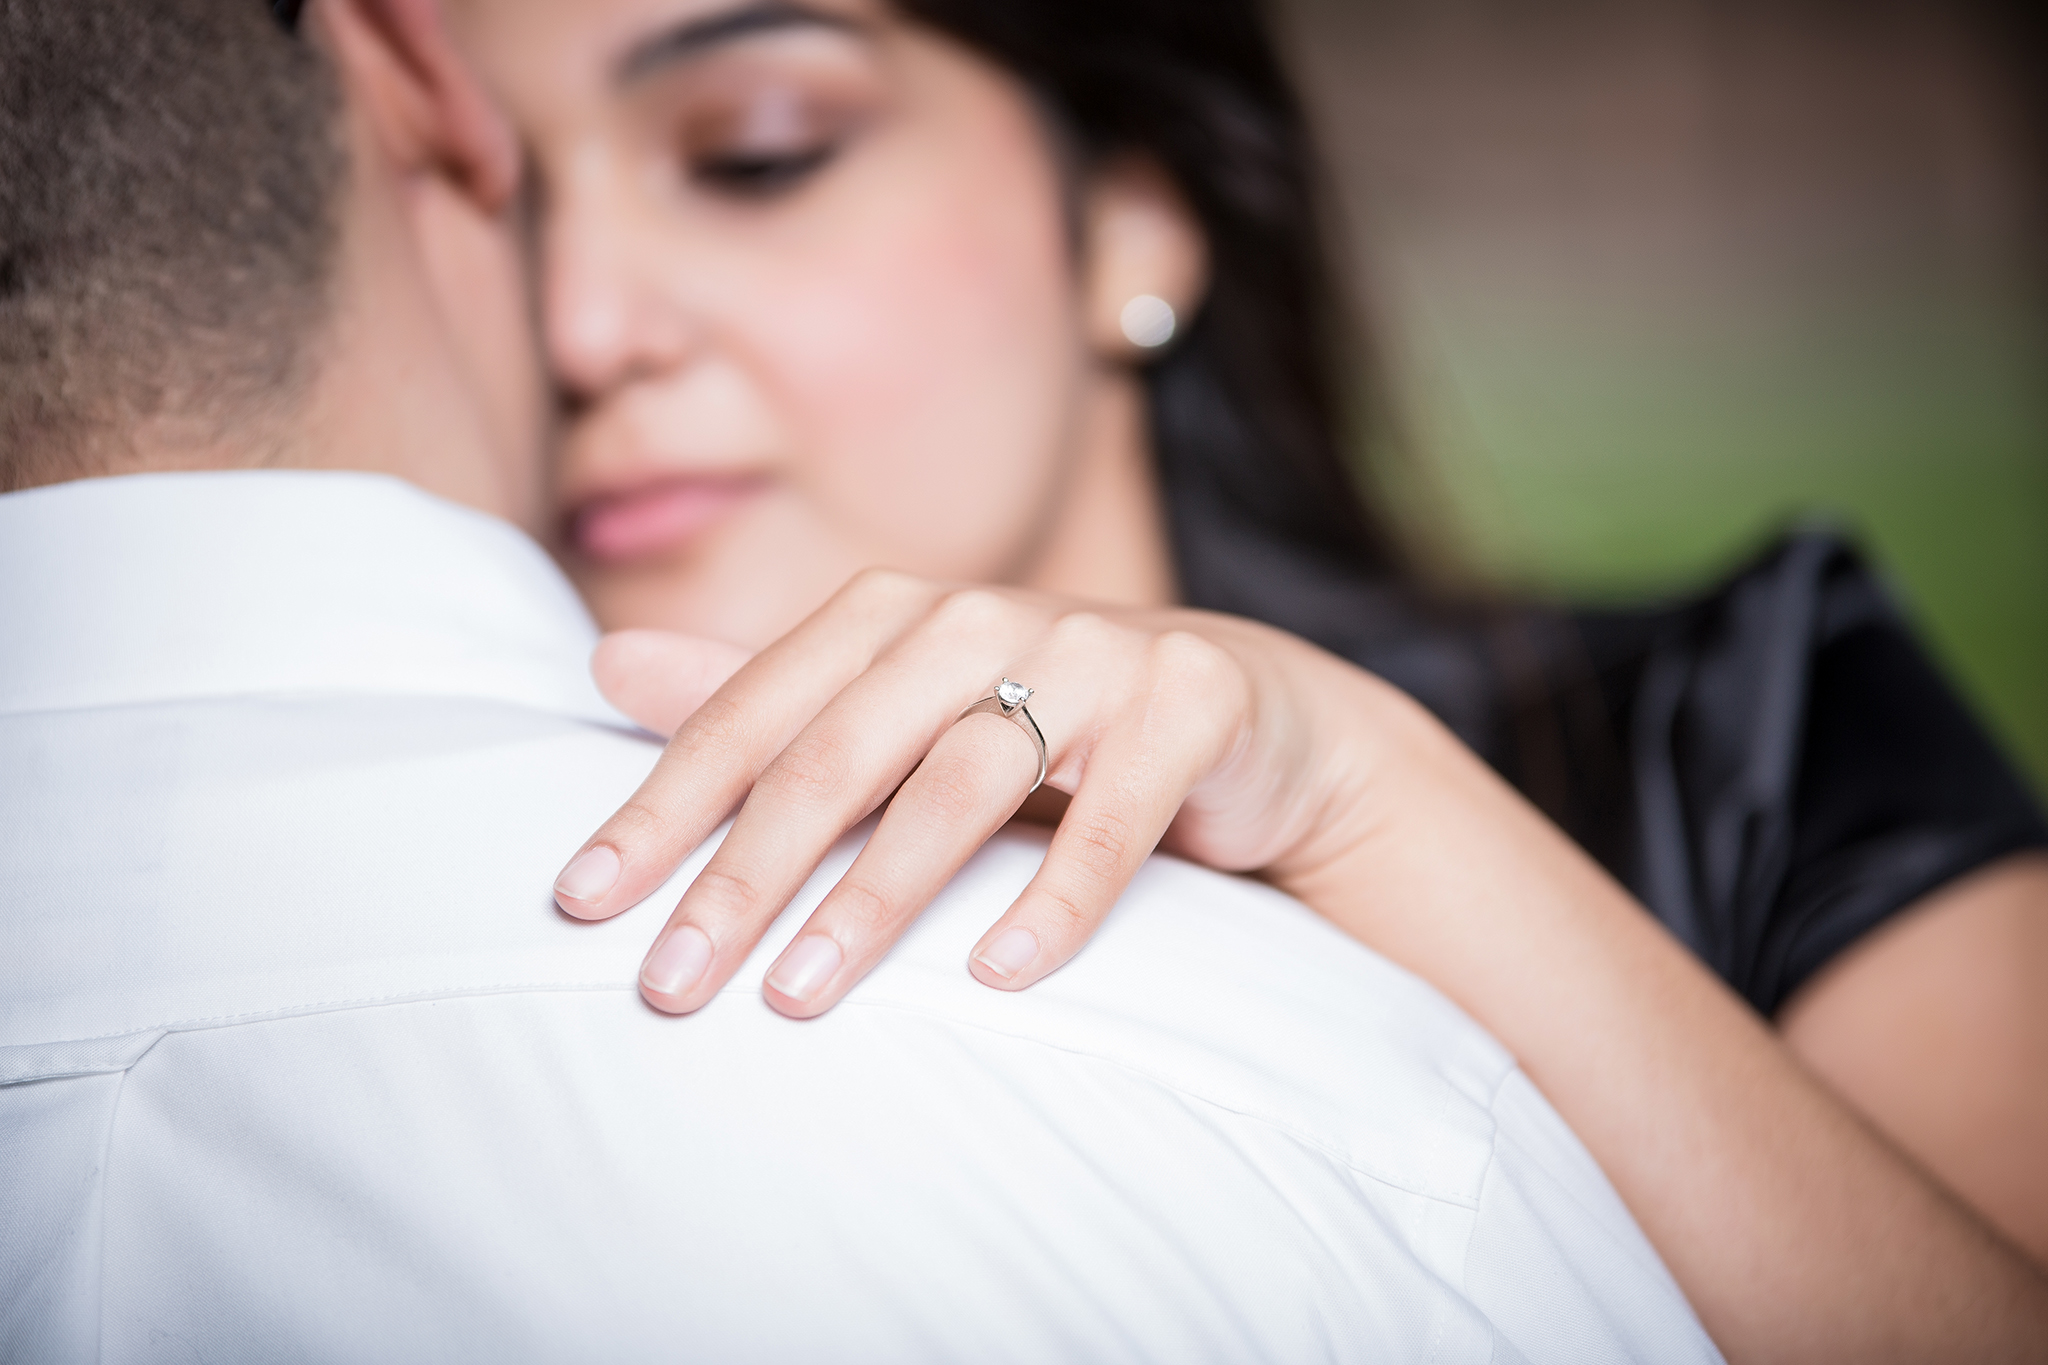 A man's shoulder with a woman looking at him with her hand on his shoulder and a ring on her finger.